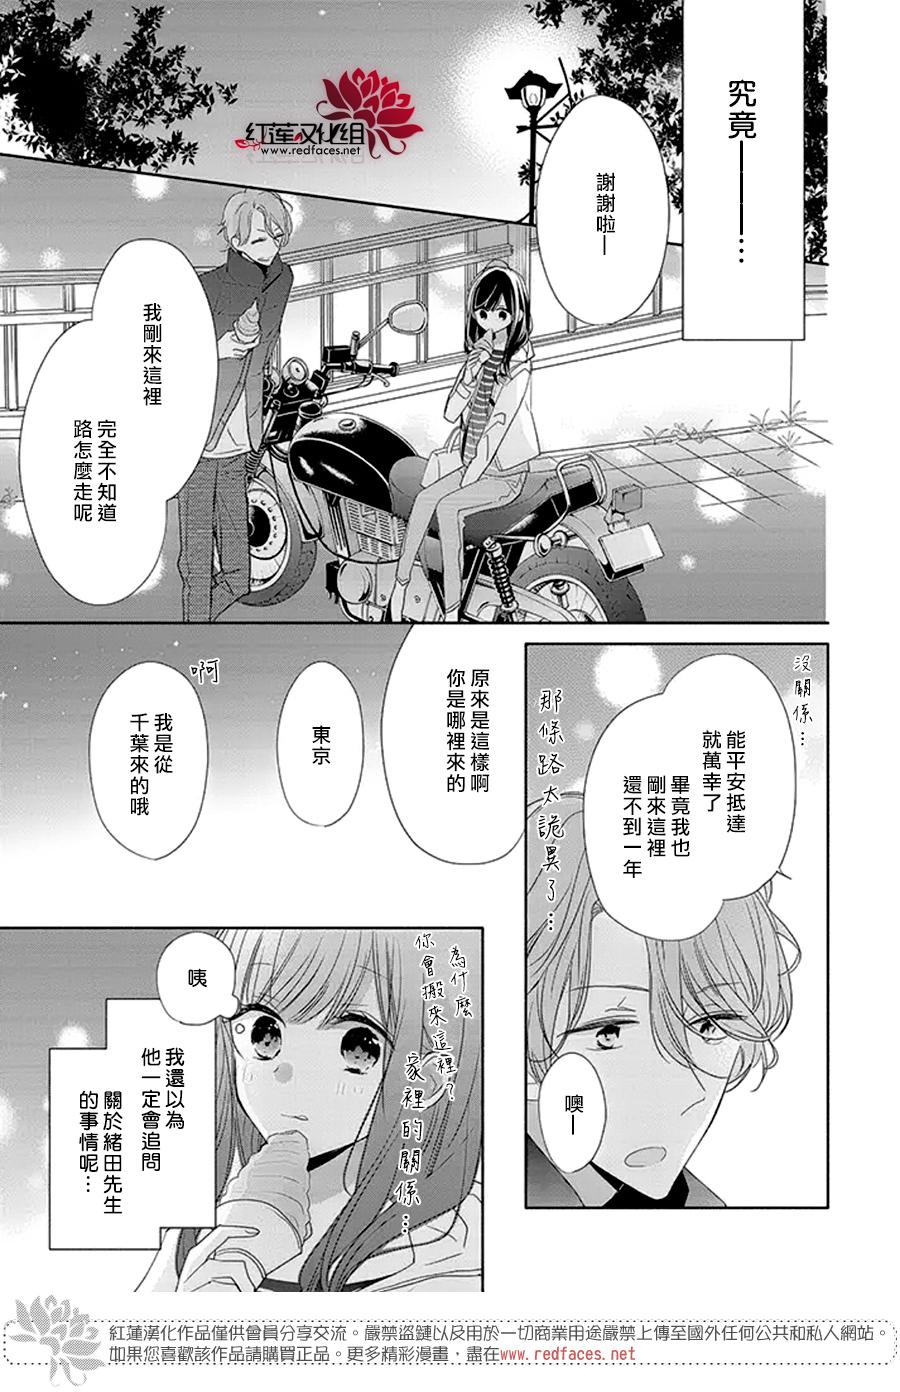 If given a second chance - 23話 - 5